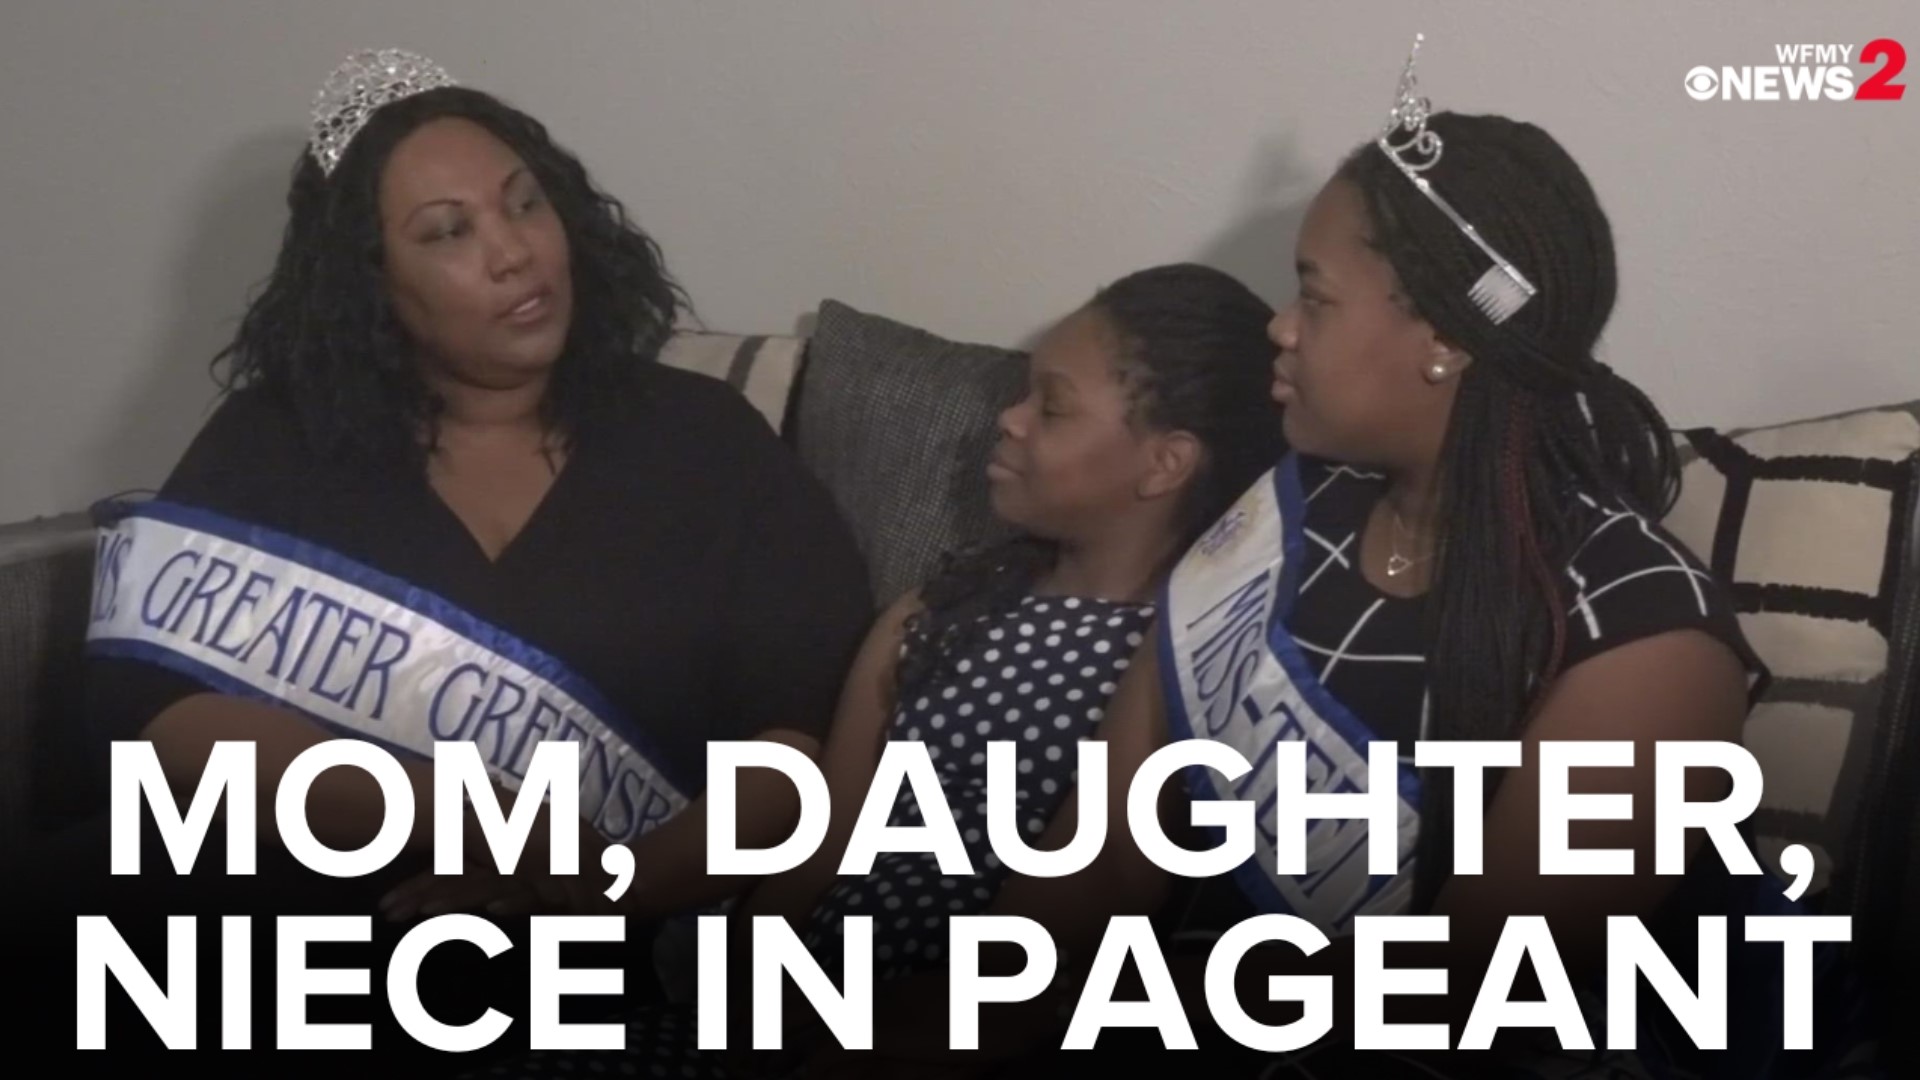 Crystal Jefferson, her daughter, and her niece are all competing in the Miss North Carolina Plus America pageant on March 18 at Winston-Salem State University.